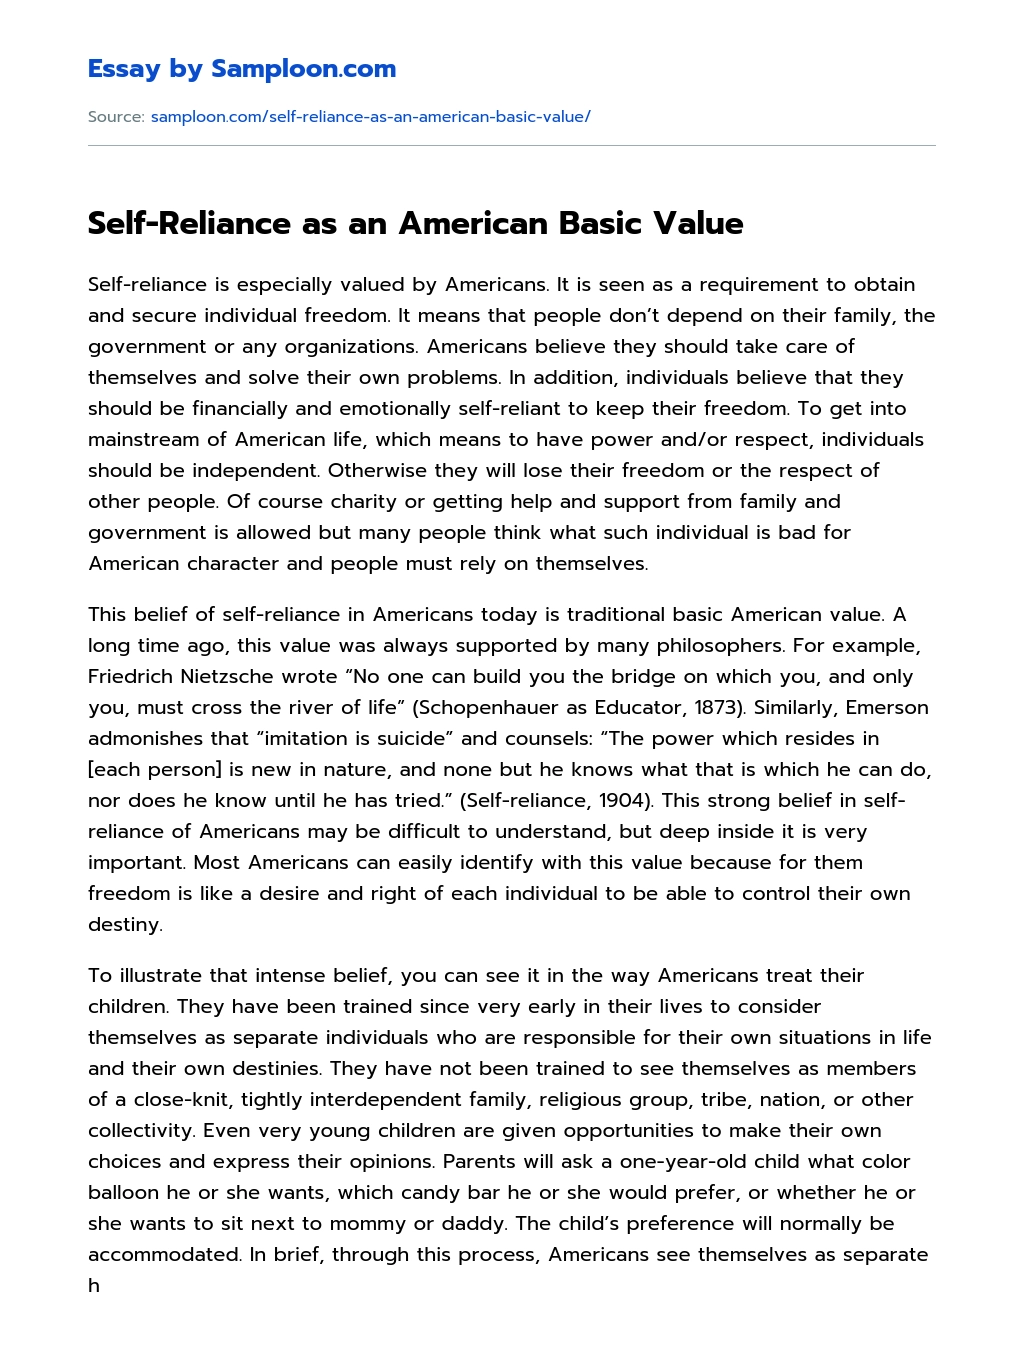 Self-Reliance as an American Basic Value essay